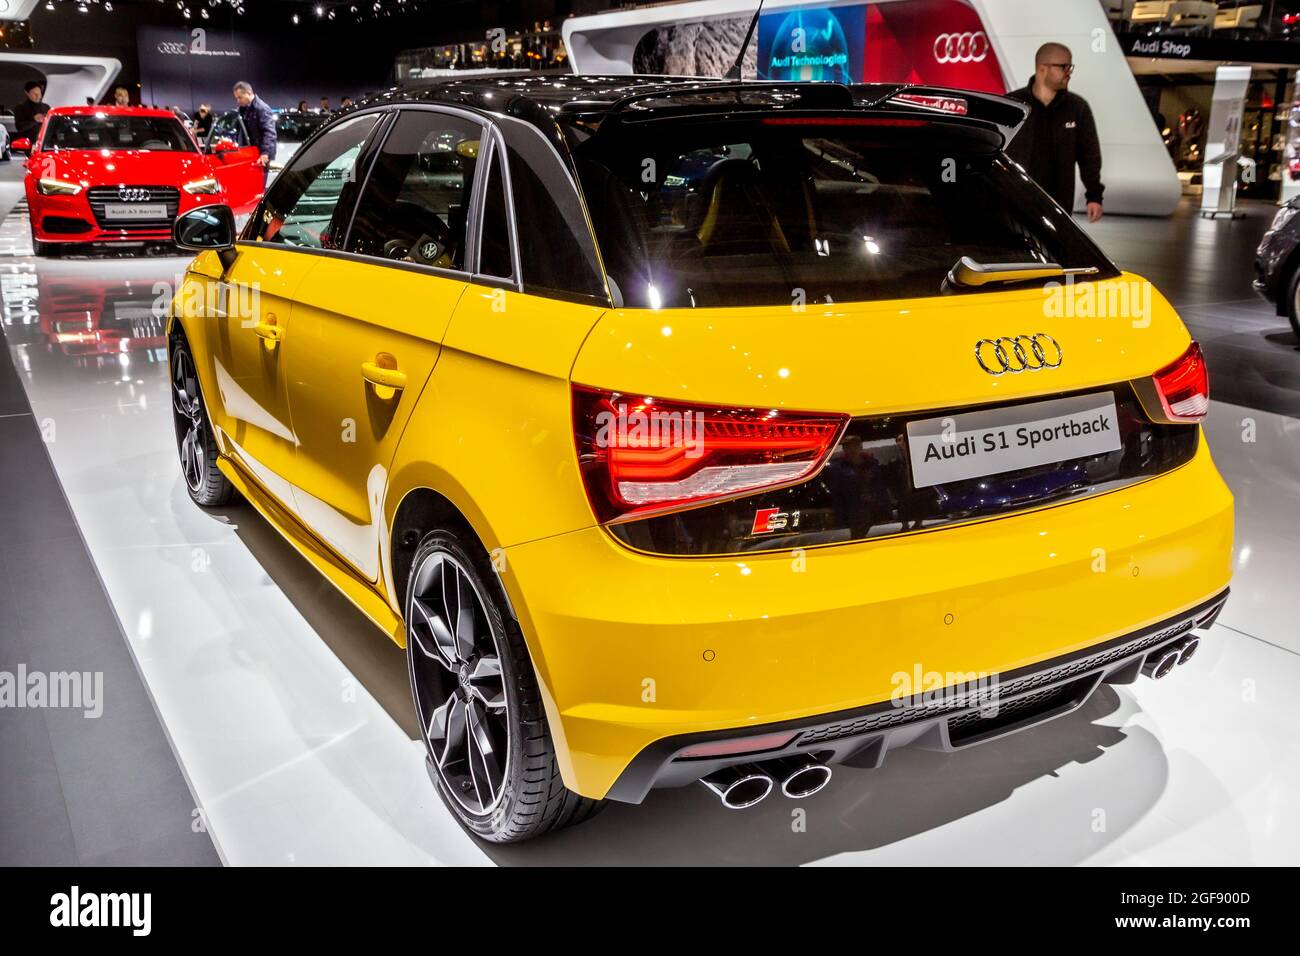 Audi S1 Sportback car showcased at the Brussels Expo Autosalon